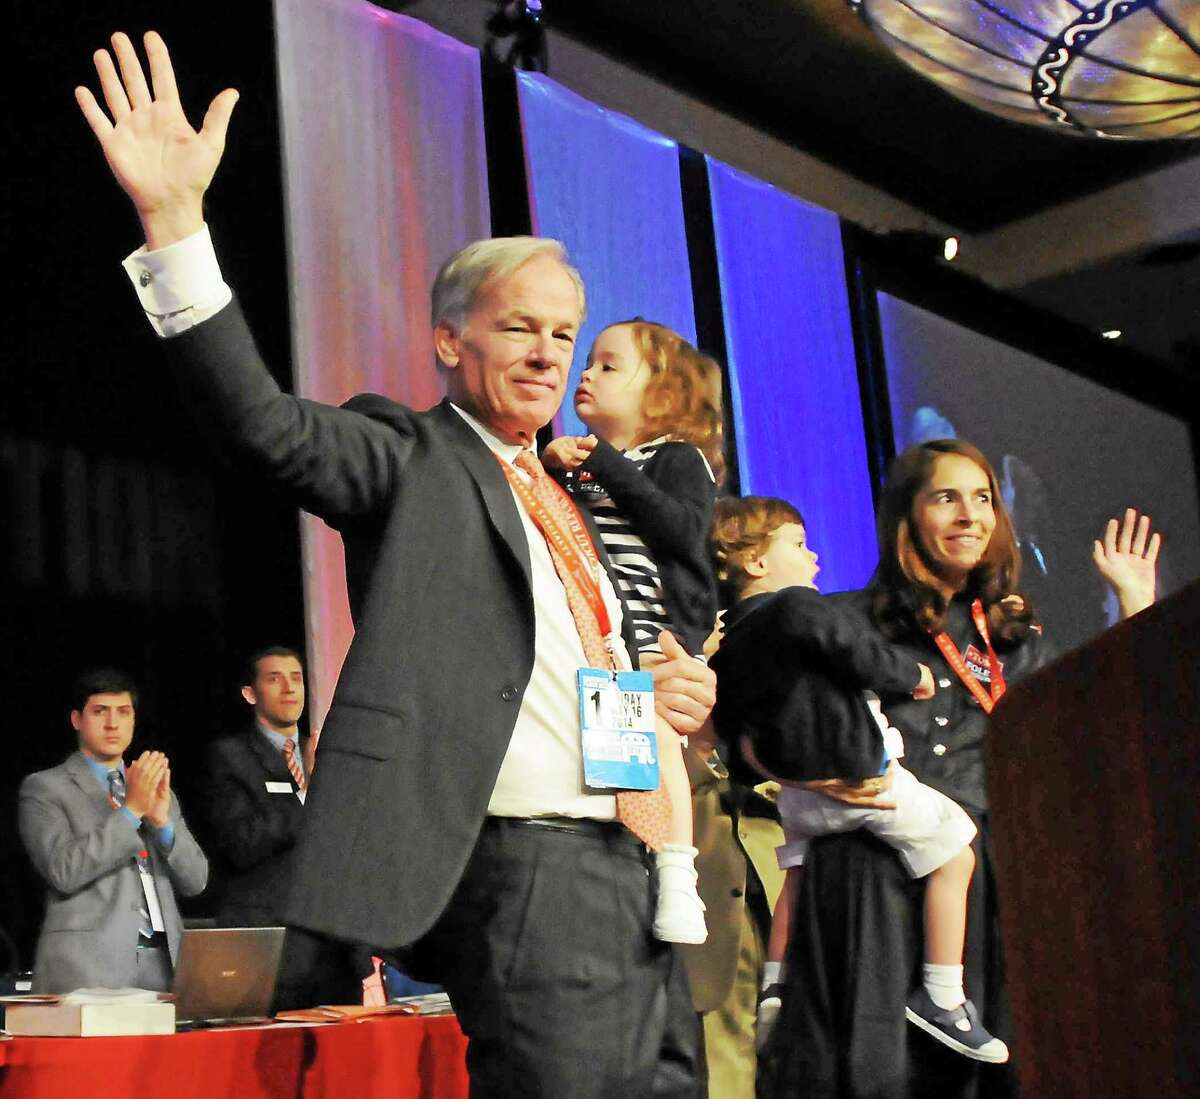 Tom Foley gets the Republican nomination for governor, as he waves holding his daughter Grace during the 2014 Connecticut Republican State Convention at the Mohegan Sun Convention Center in Uncasville Friday. On the right, his wife Leslie holds their son Reed.